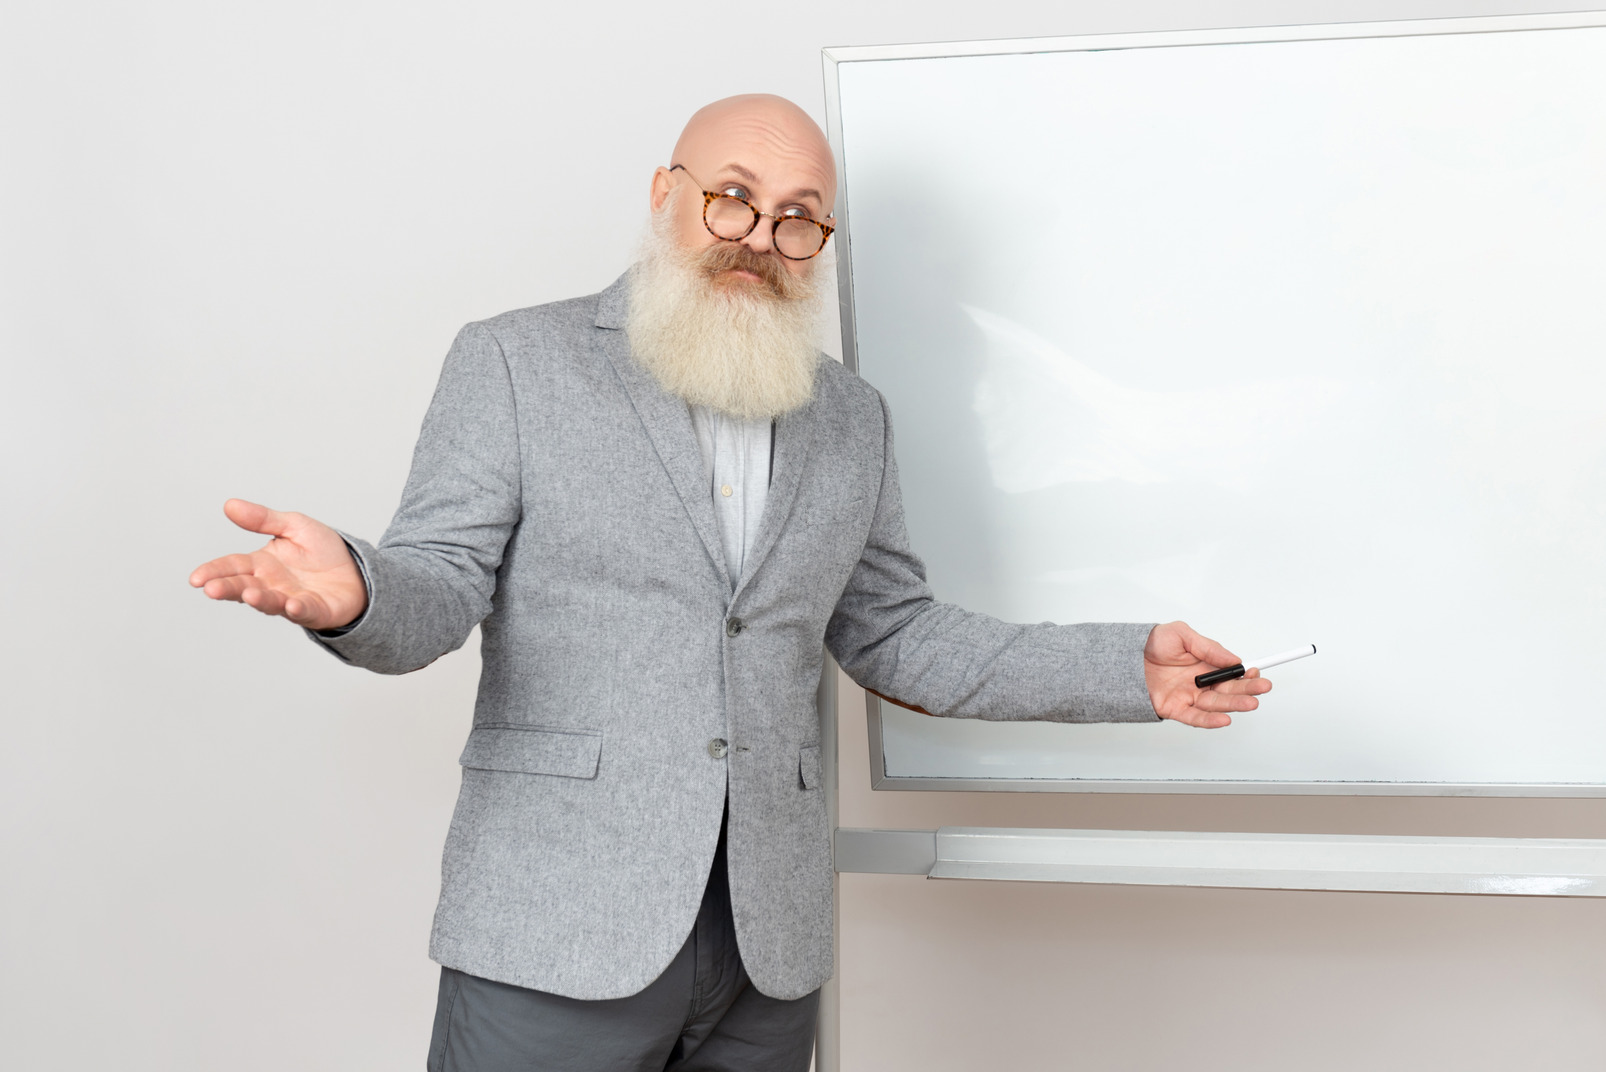 Old professor standing next to whiteboard and explaining something